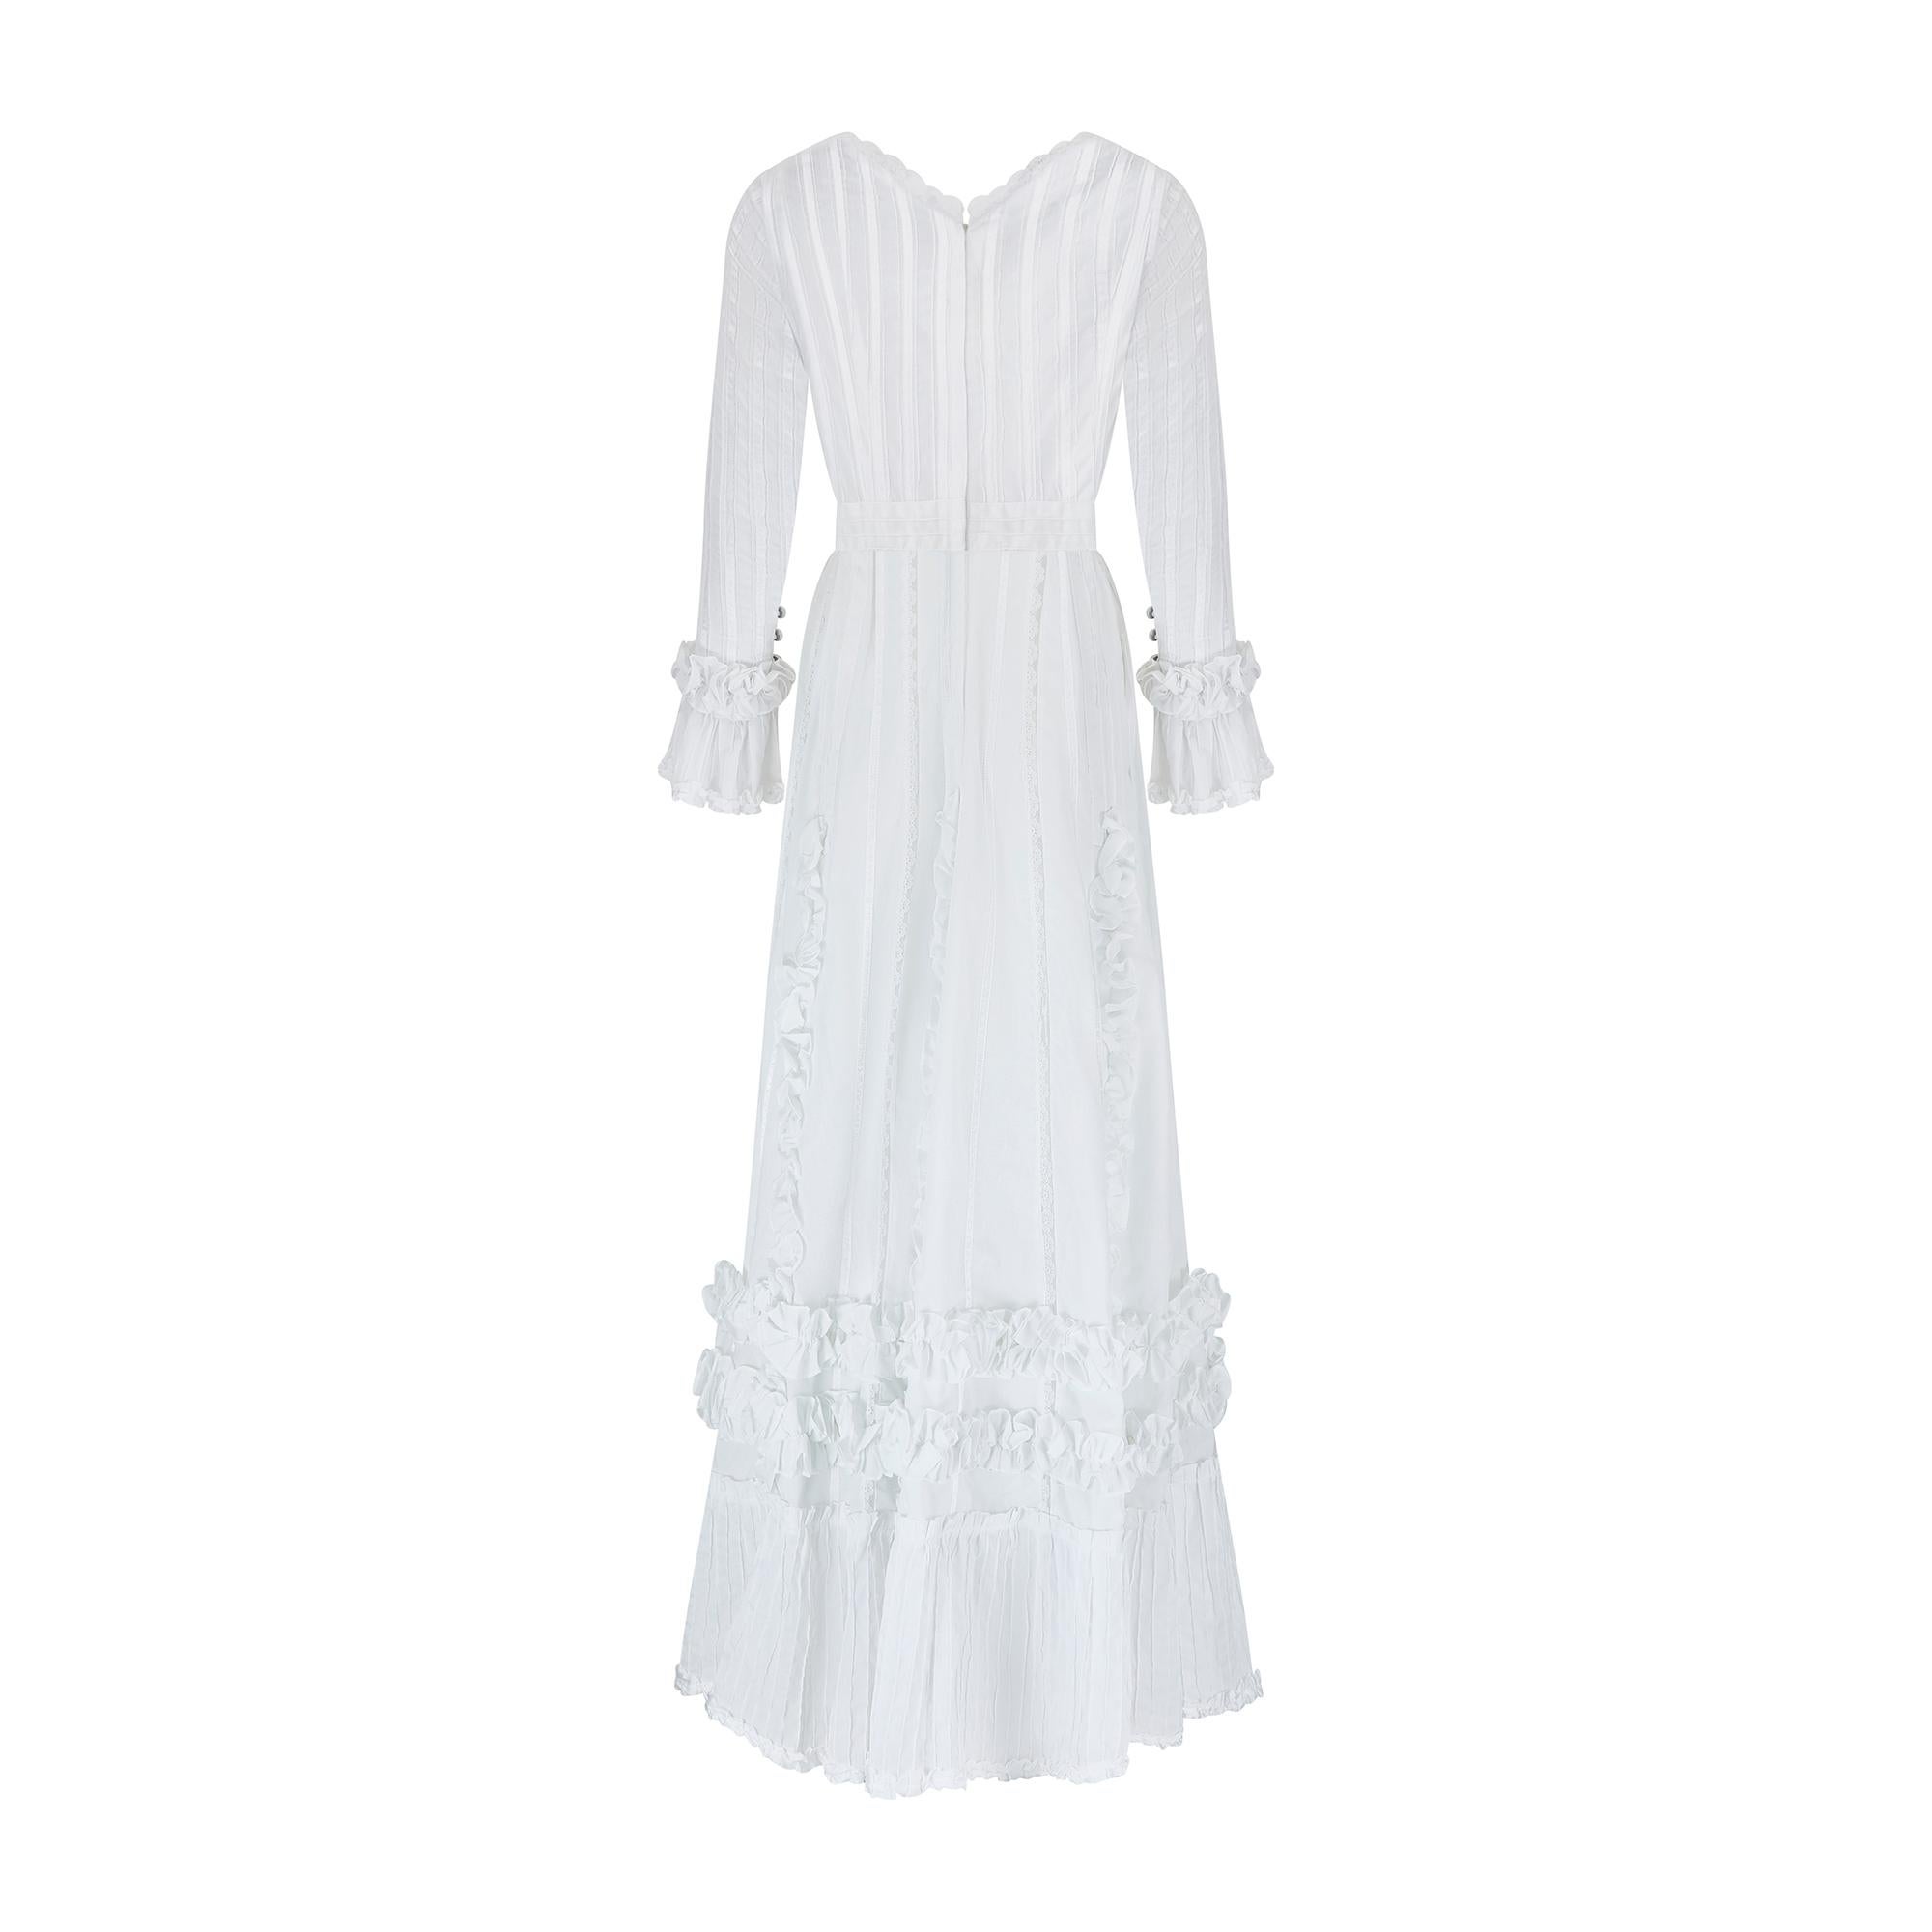 1970s Mexicana White Cotton and Lace Wedding Dress In Excellent Condition For Sale In London, GB